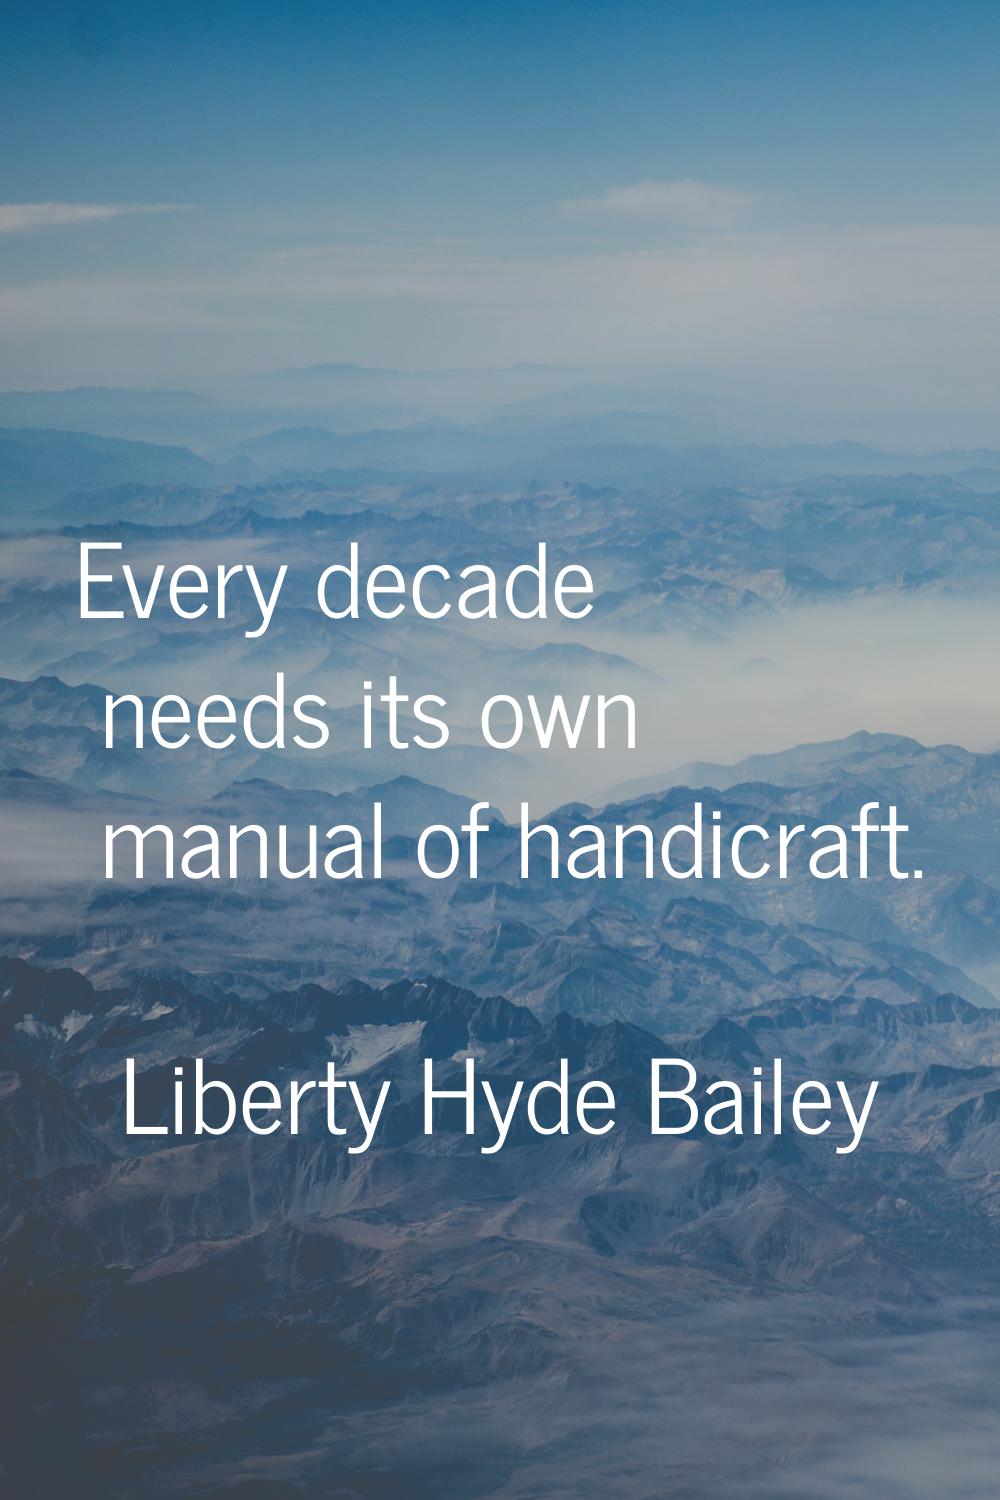 Every decade needs its own manual of handicraft.